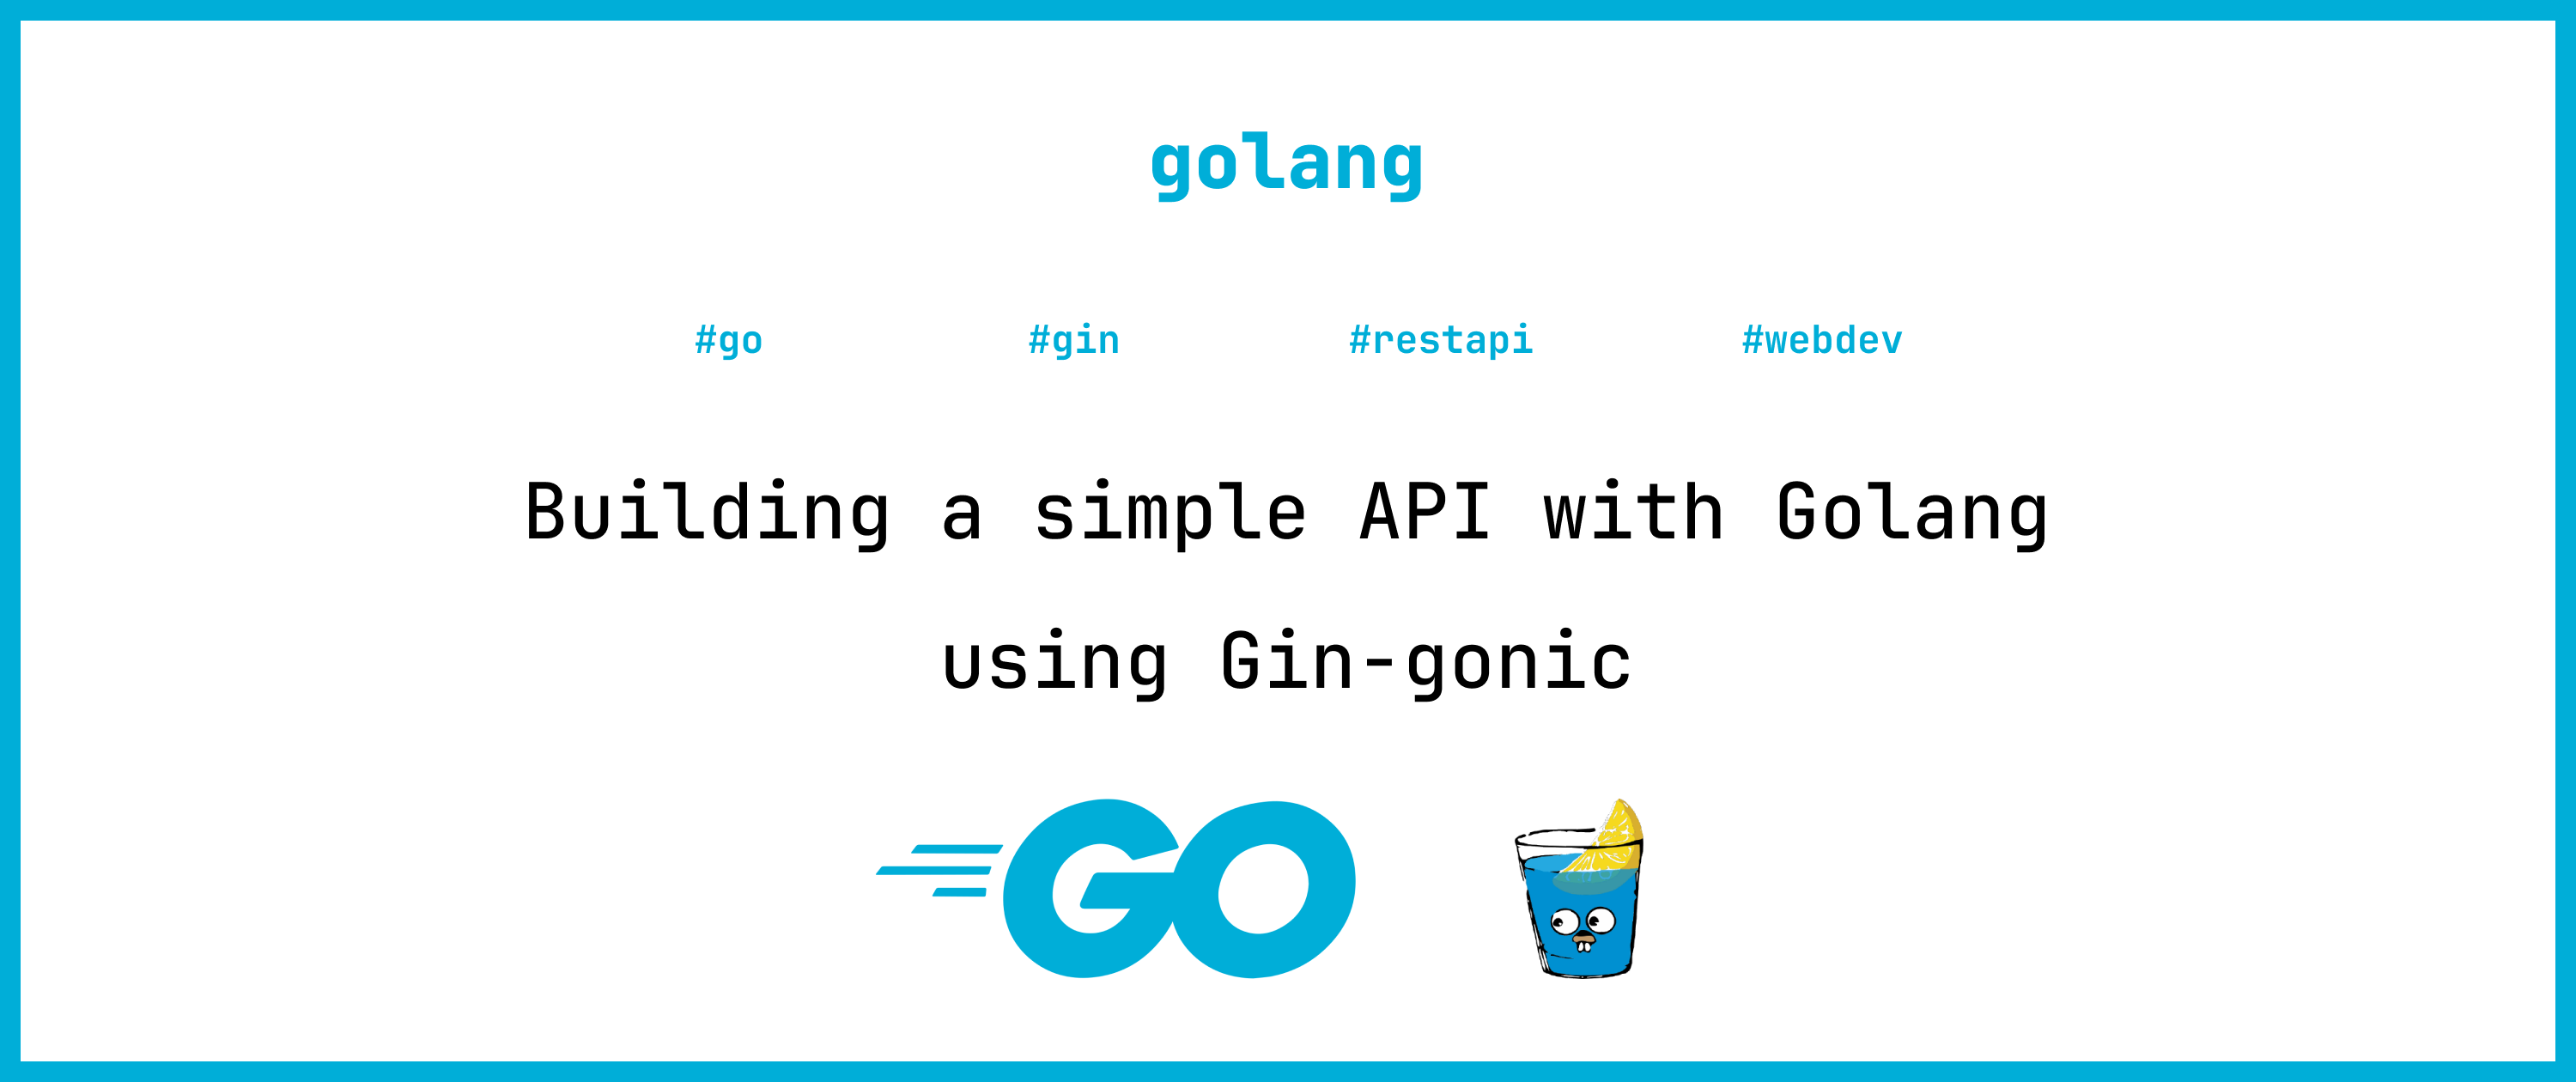 Building a simple API with Golang using Gin-gonic